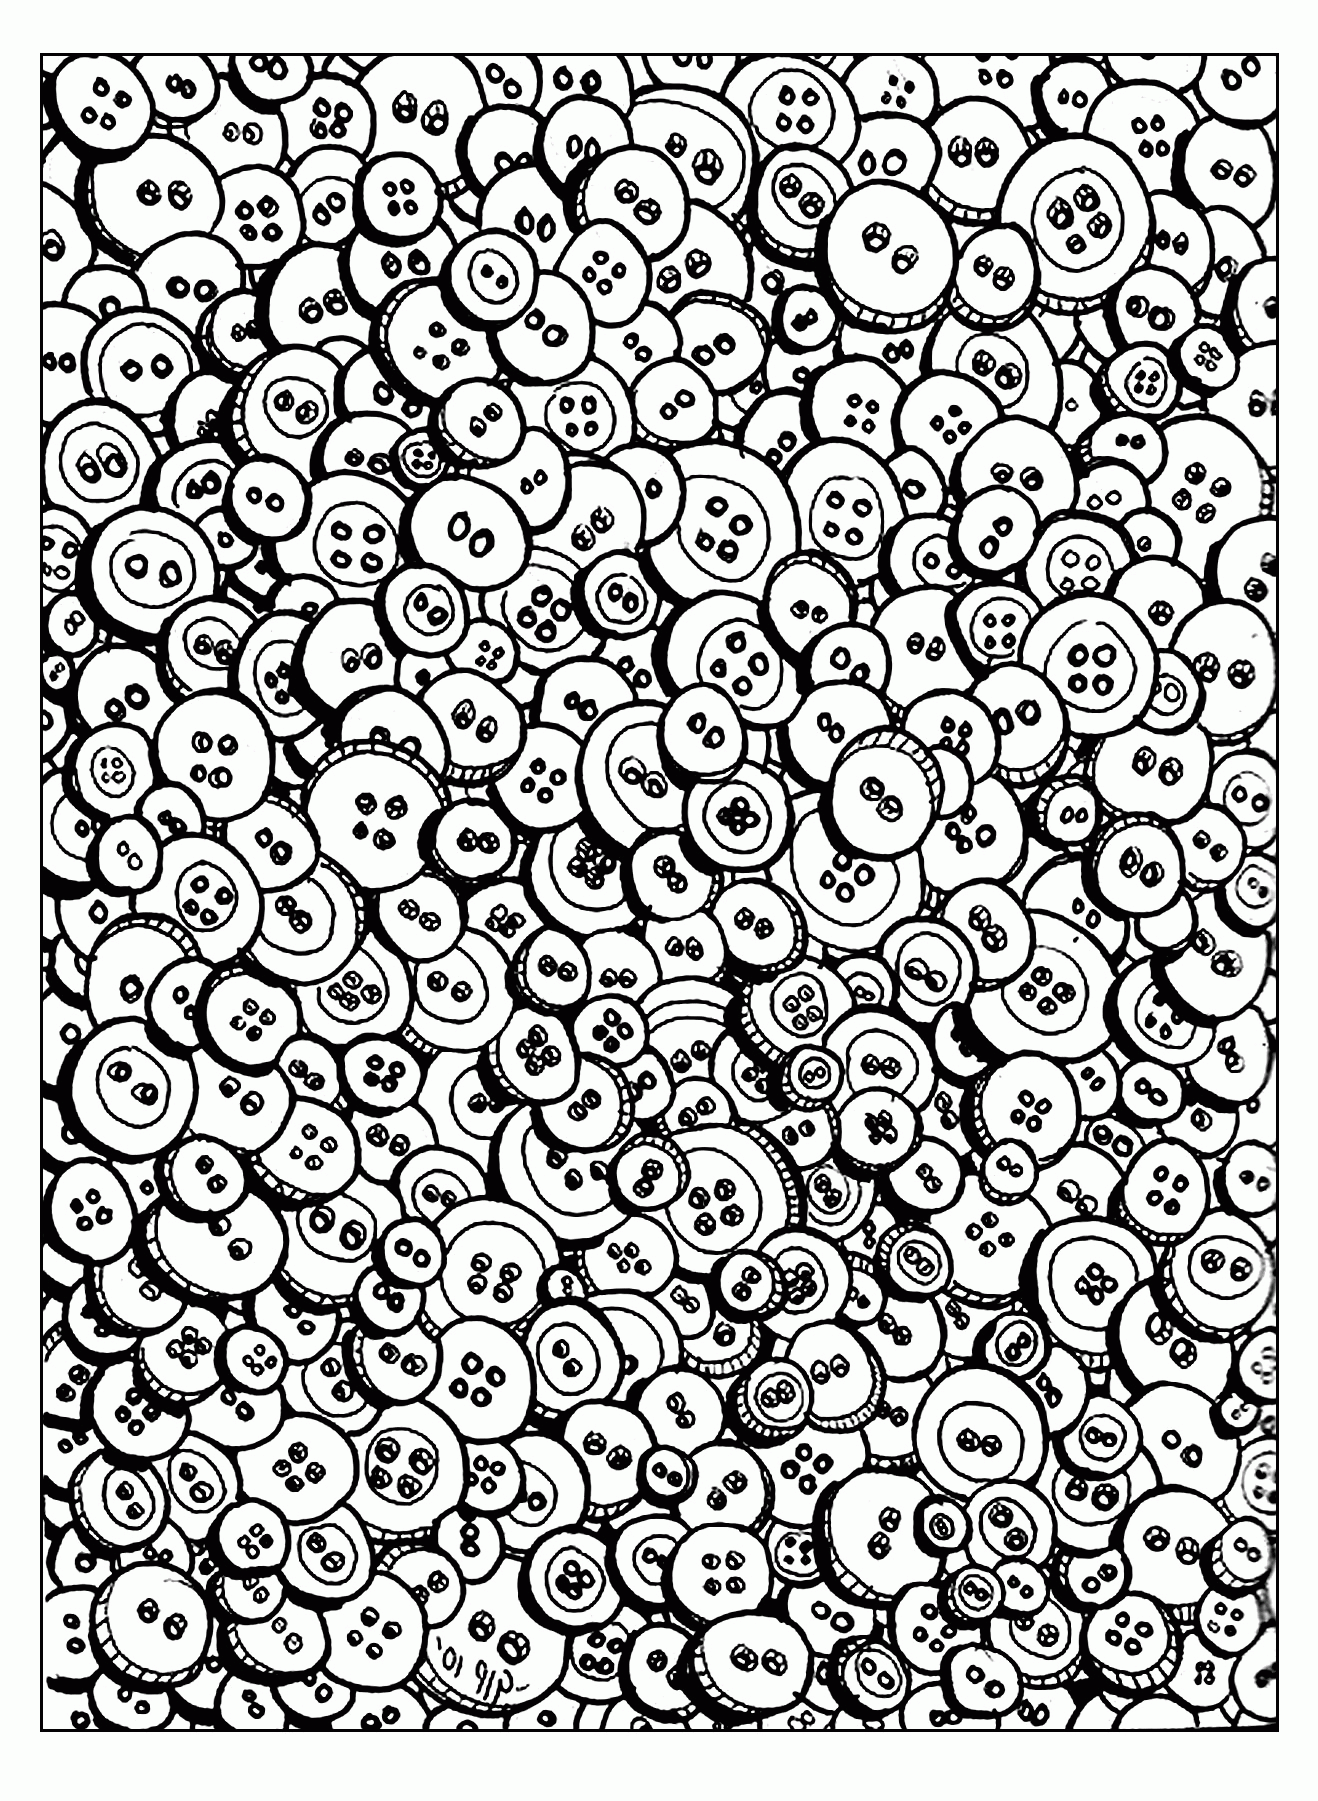 Unclassifiable - Coloring Pages for adults